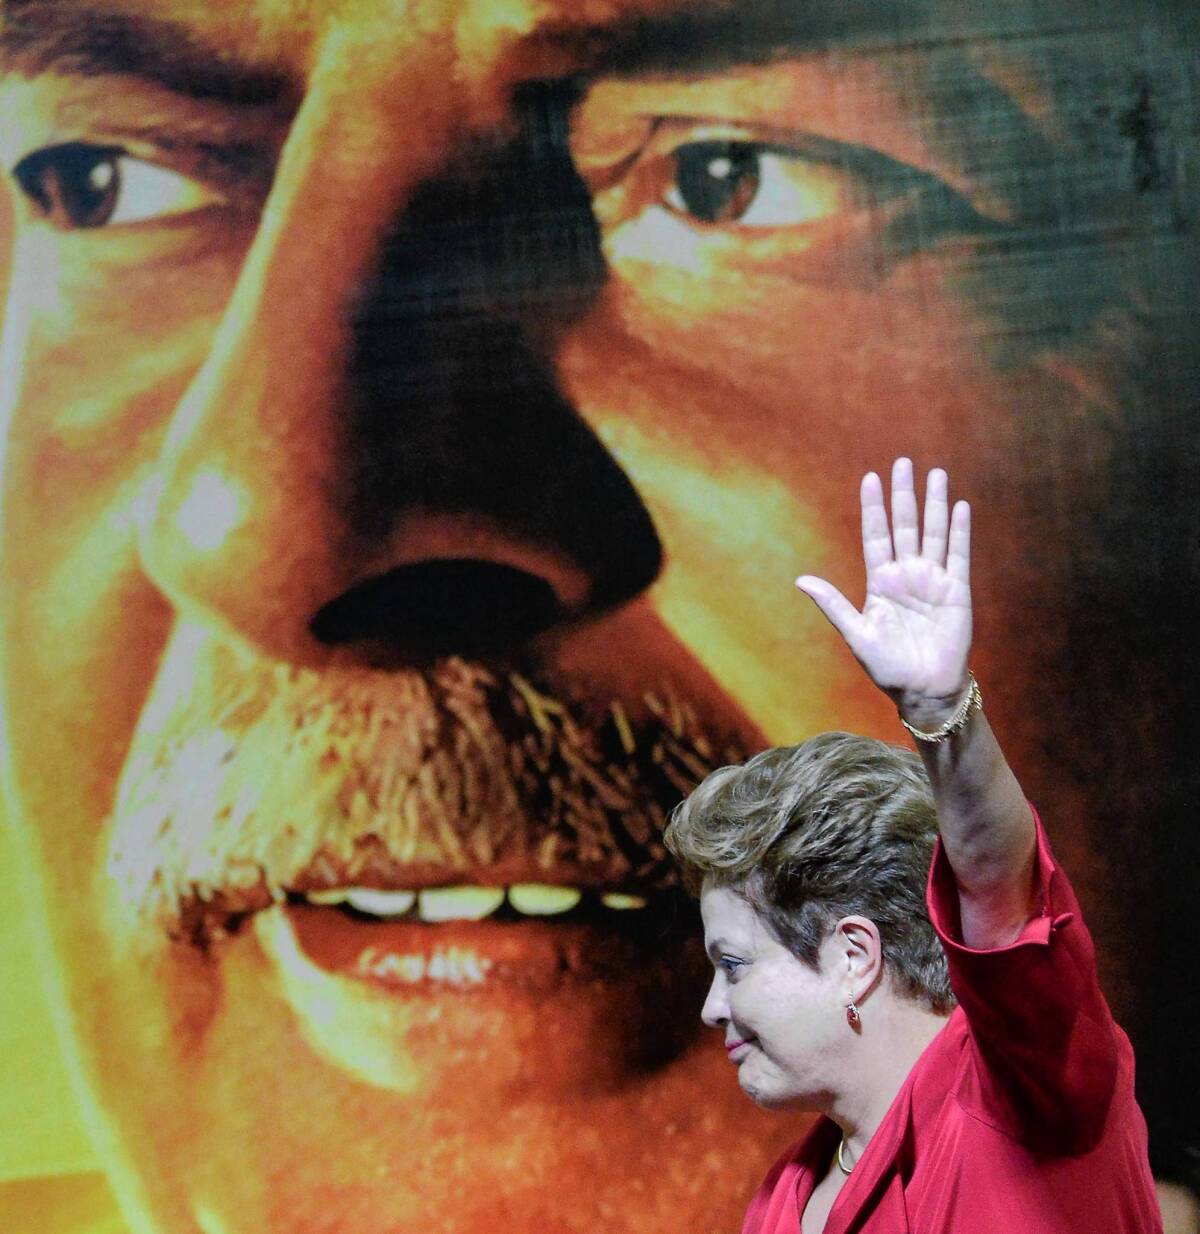 Brazilian President Dilma Rousseff has taken a much more muted approach to foreign policy than predecessor Luiz Inacio Lula da Silva, avoiding the type of activism that often annoyed the United States when he was in power.